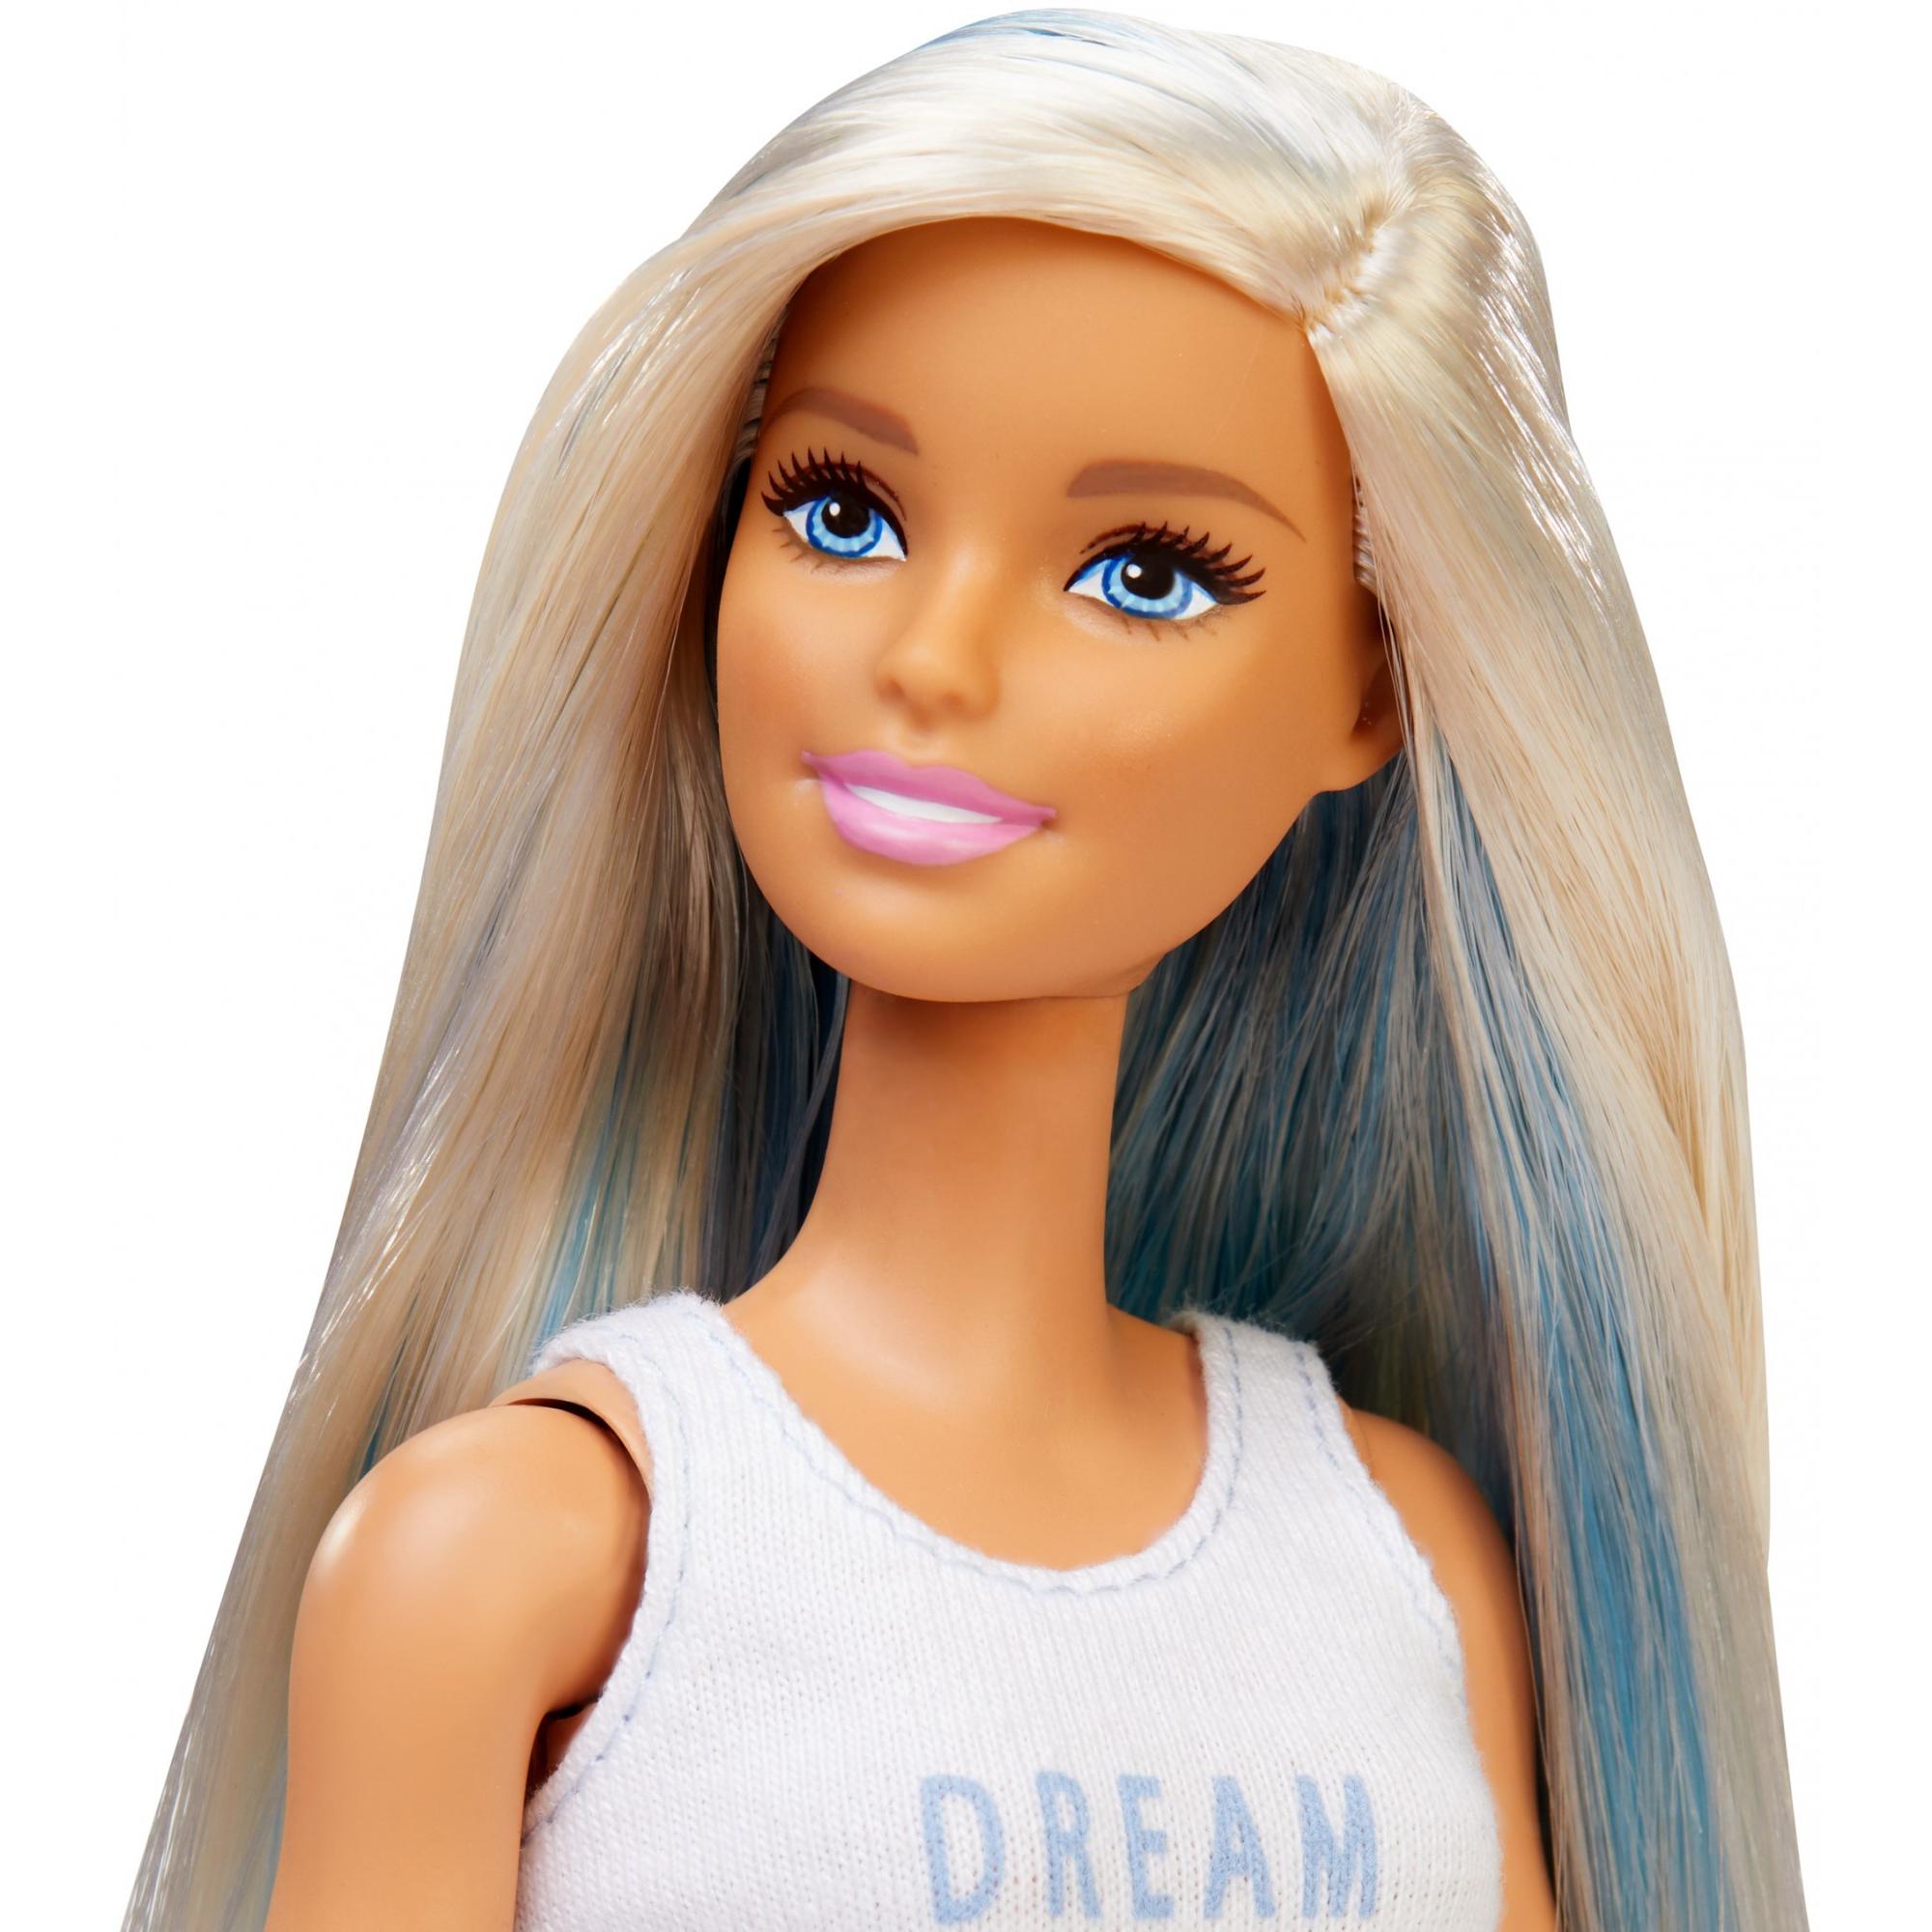 Barbie Fashionistas Doll, Original Body Type with Dream Tee - image 4 of 8